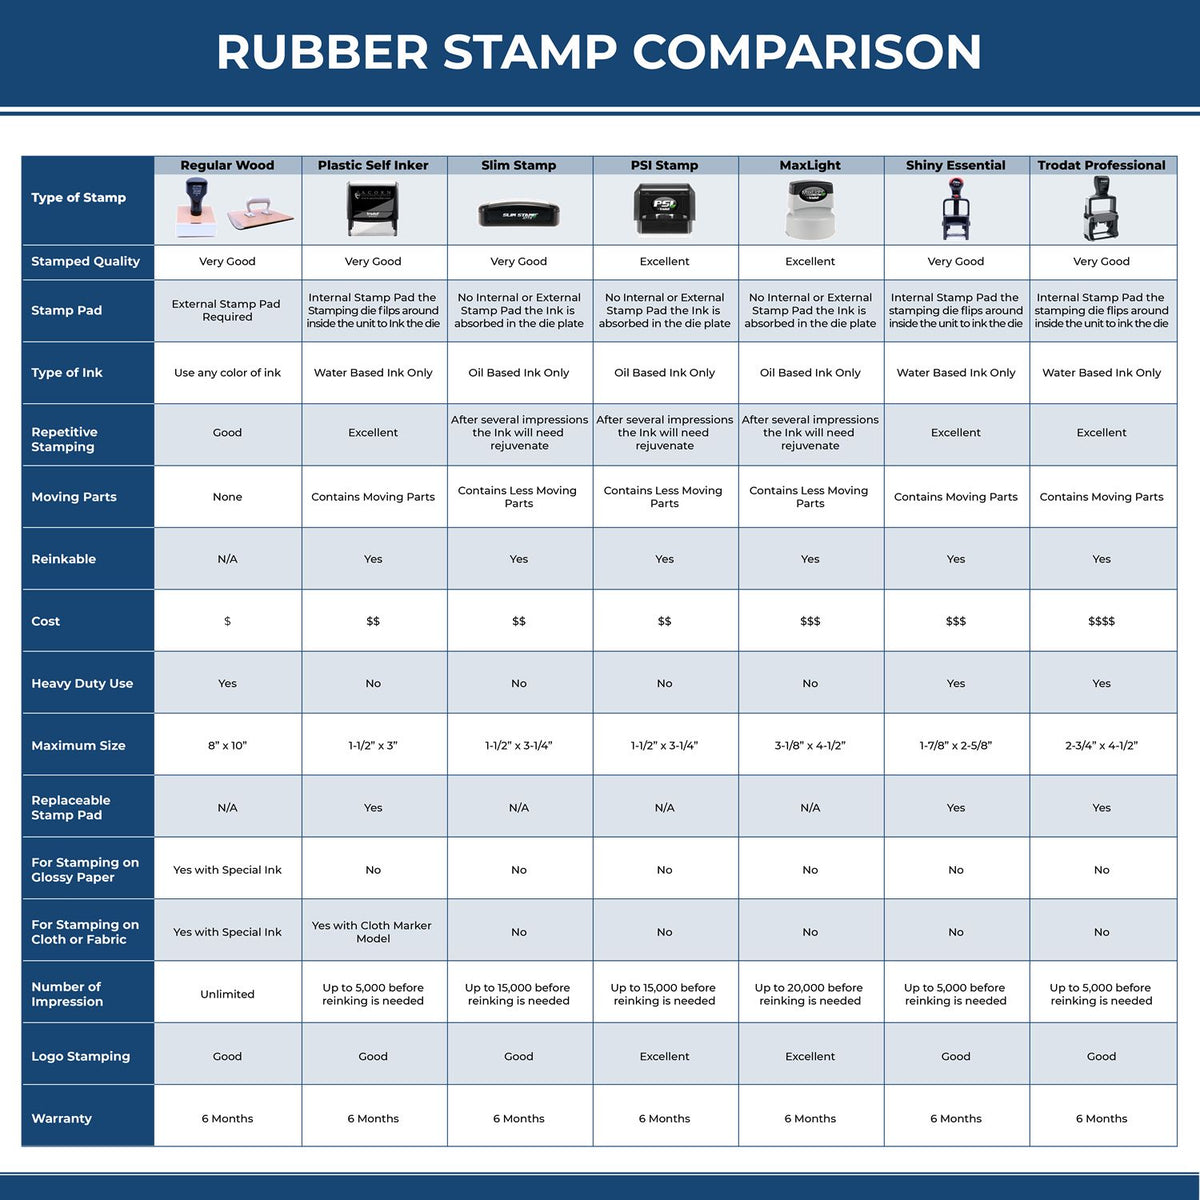 A comparison chart for the different types of mount models available for the Premium MaxLight Pre-Inked Alaska Landscape Architectural Stamp.